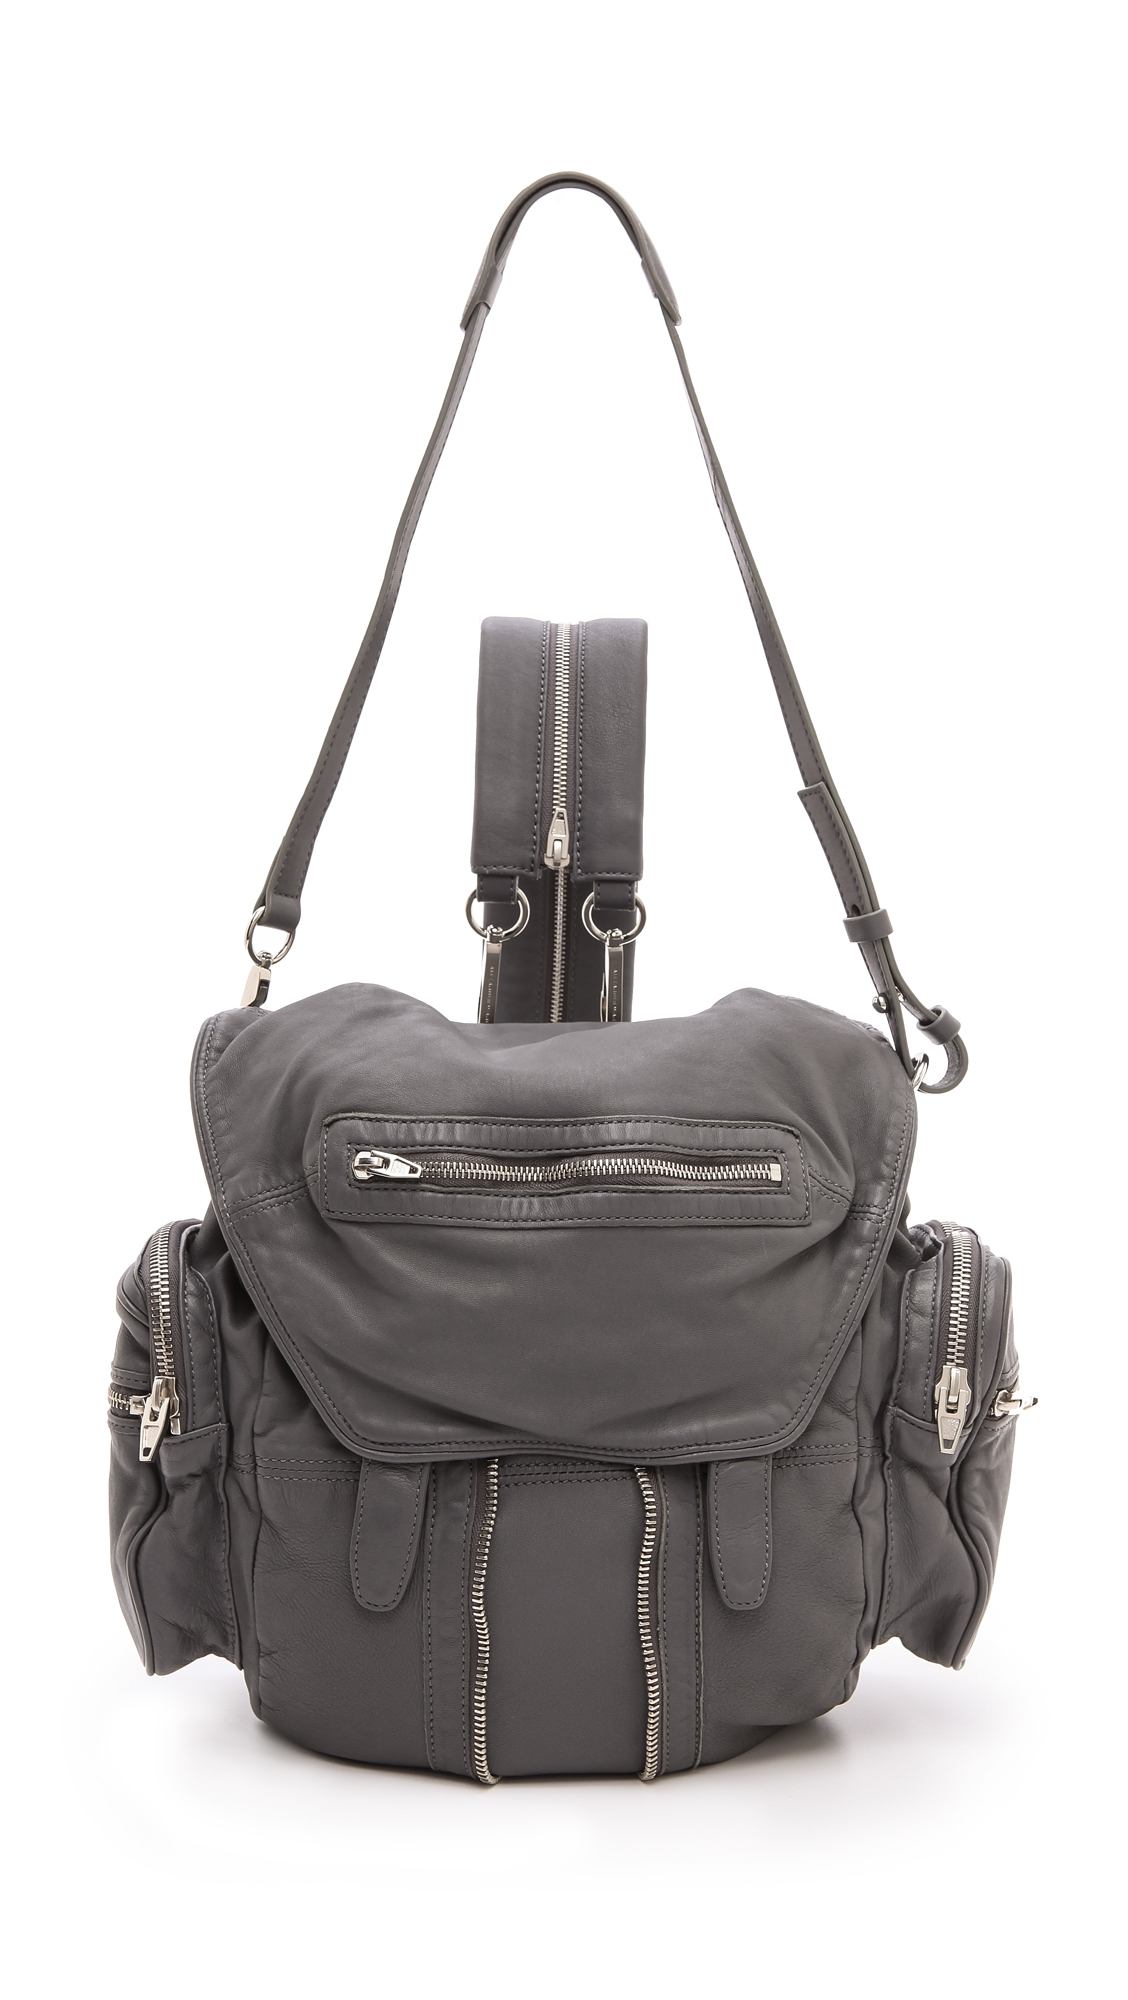 Alexander Wang Leather Marti Backpack in Grey (Gray) - Lyst